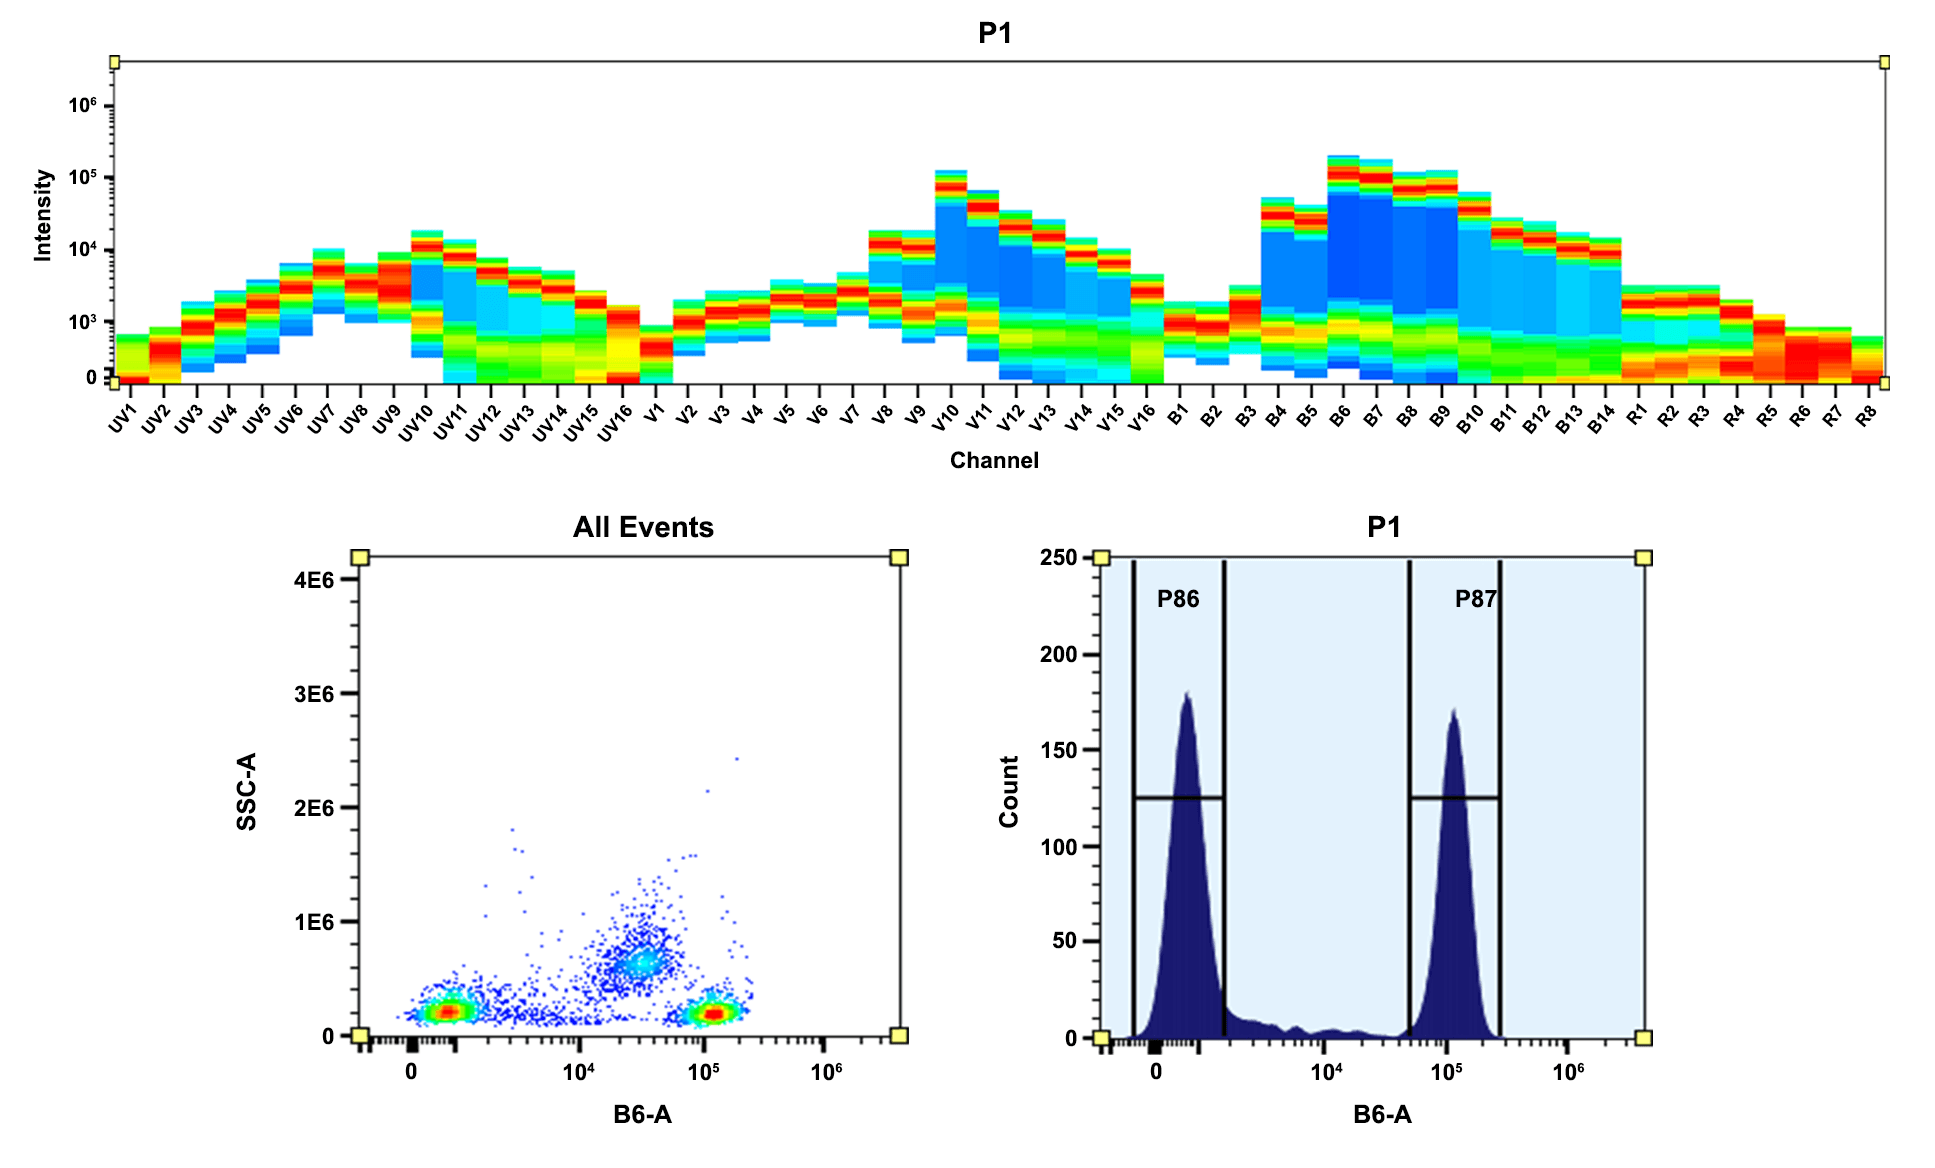 Top) Spectral pattern was generated using a 4-laser spectral cytometer. Spatially offset lasers (355 nm, 405 nm, 488 nm, and 640 nm) were used to create four distinct emission profiles, then, when combined, yielded the overall spectral signature. Bottom) Flow cytometry analysis of whole blood cells stained with PE/iFluor® 610 anti-human CD4 *SK3* conjugate. The fluorescence signal was monitored using an Aurora spectral flow cytometer in the PE/iFluor® 610 specific B6-A channel.